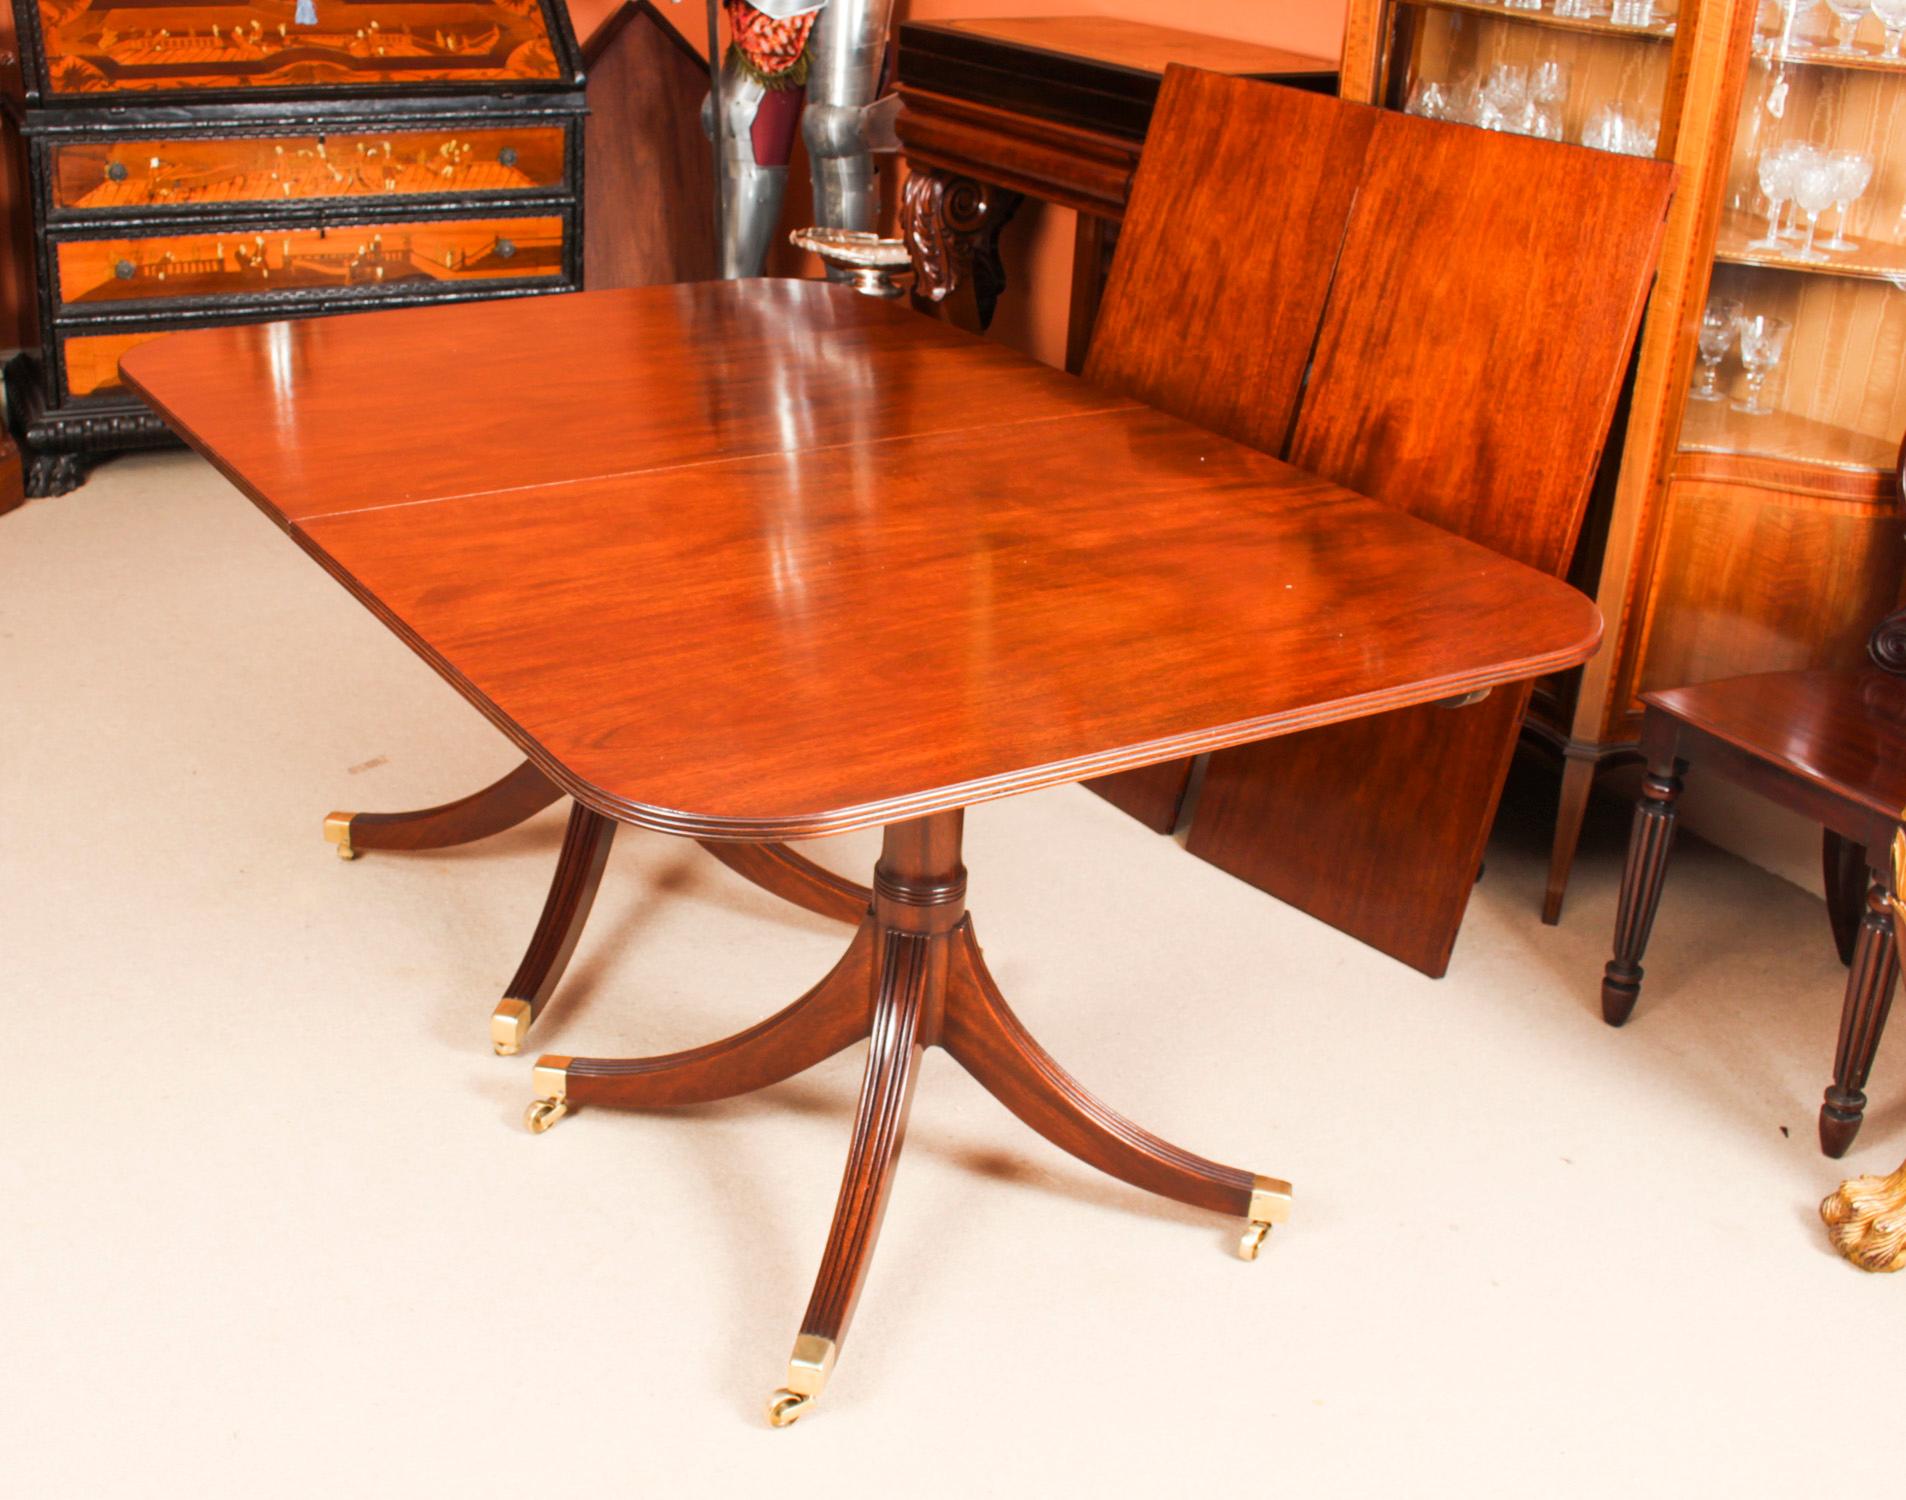 This is a fabulous Vintage dining set comprising a Regency style dining table and a set of six shield back dining chairs, by William Tillman, Circa 1975 in date.

The table is made of stunning solid flame mahogany and is raised on two 